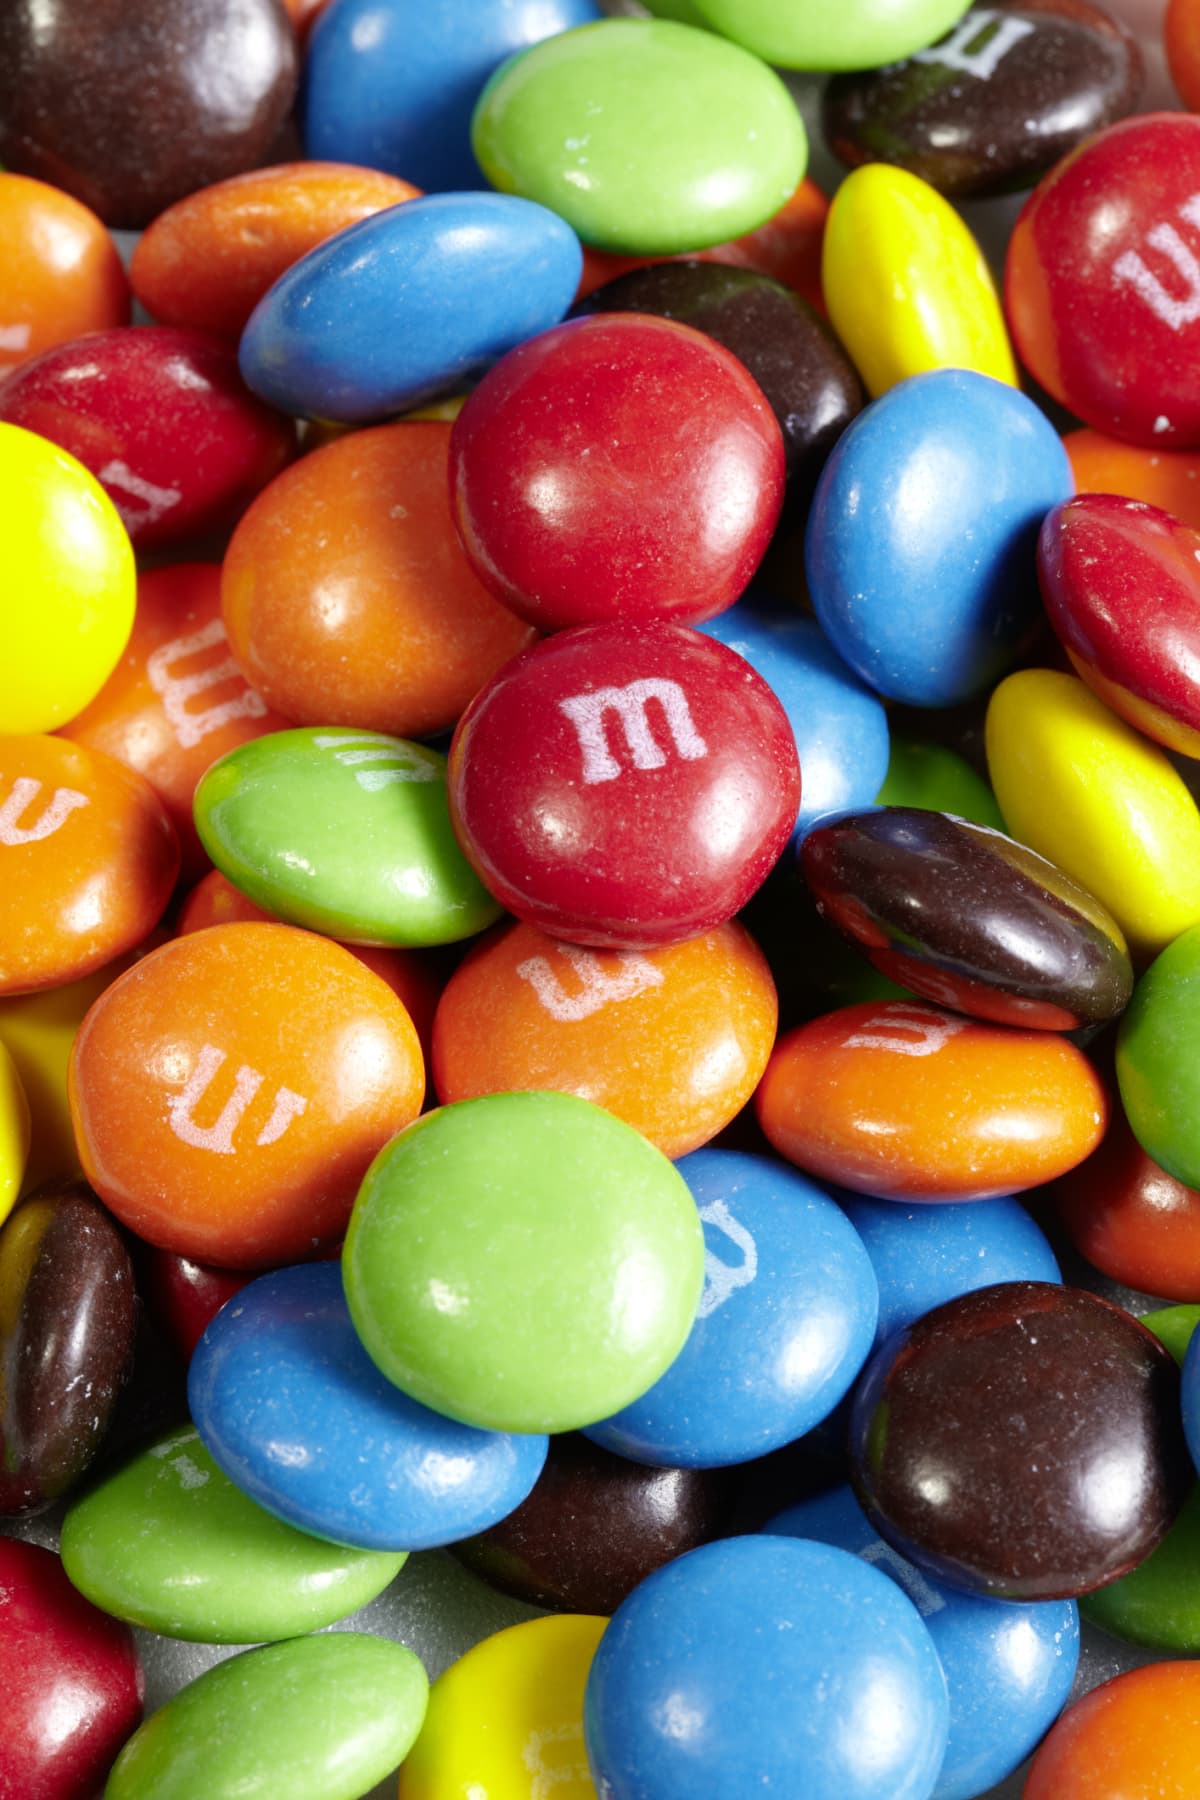 "Fort Lee, USA - November 4, 2011: stack of Mars brand candy coated chocolate M&Ms."